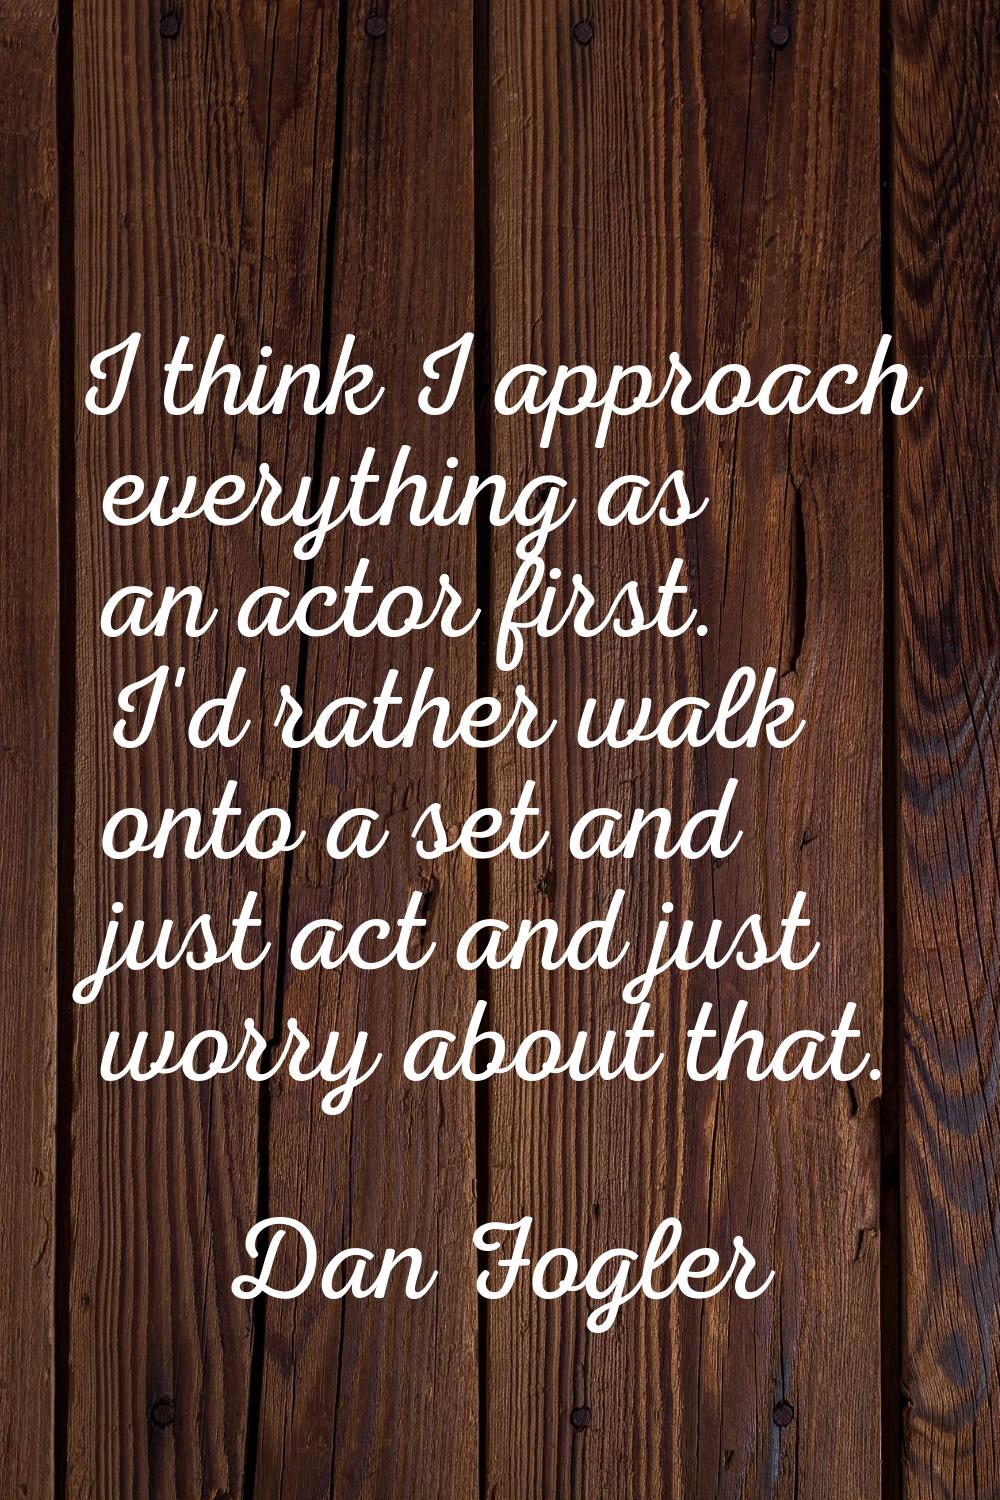 I think I approach everything as an actor first. I'd rather walk onto a set and just act and just w